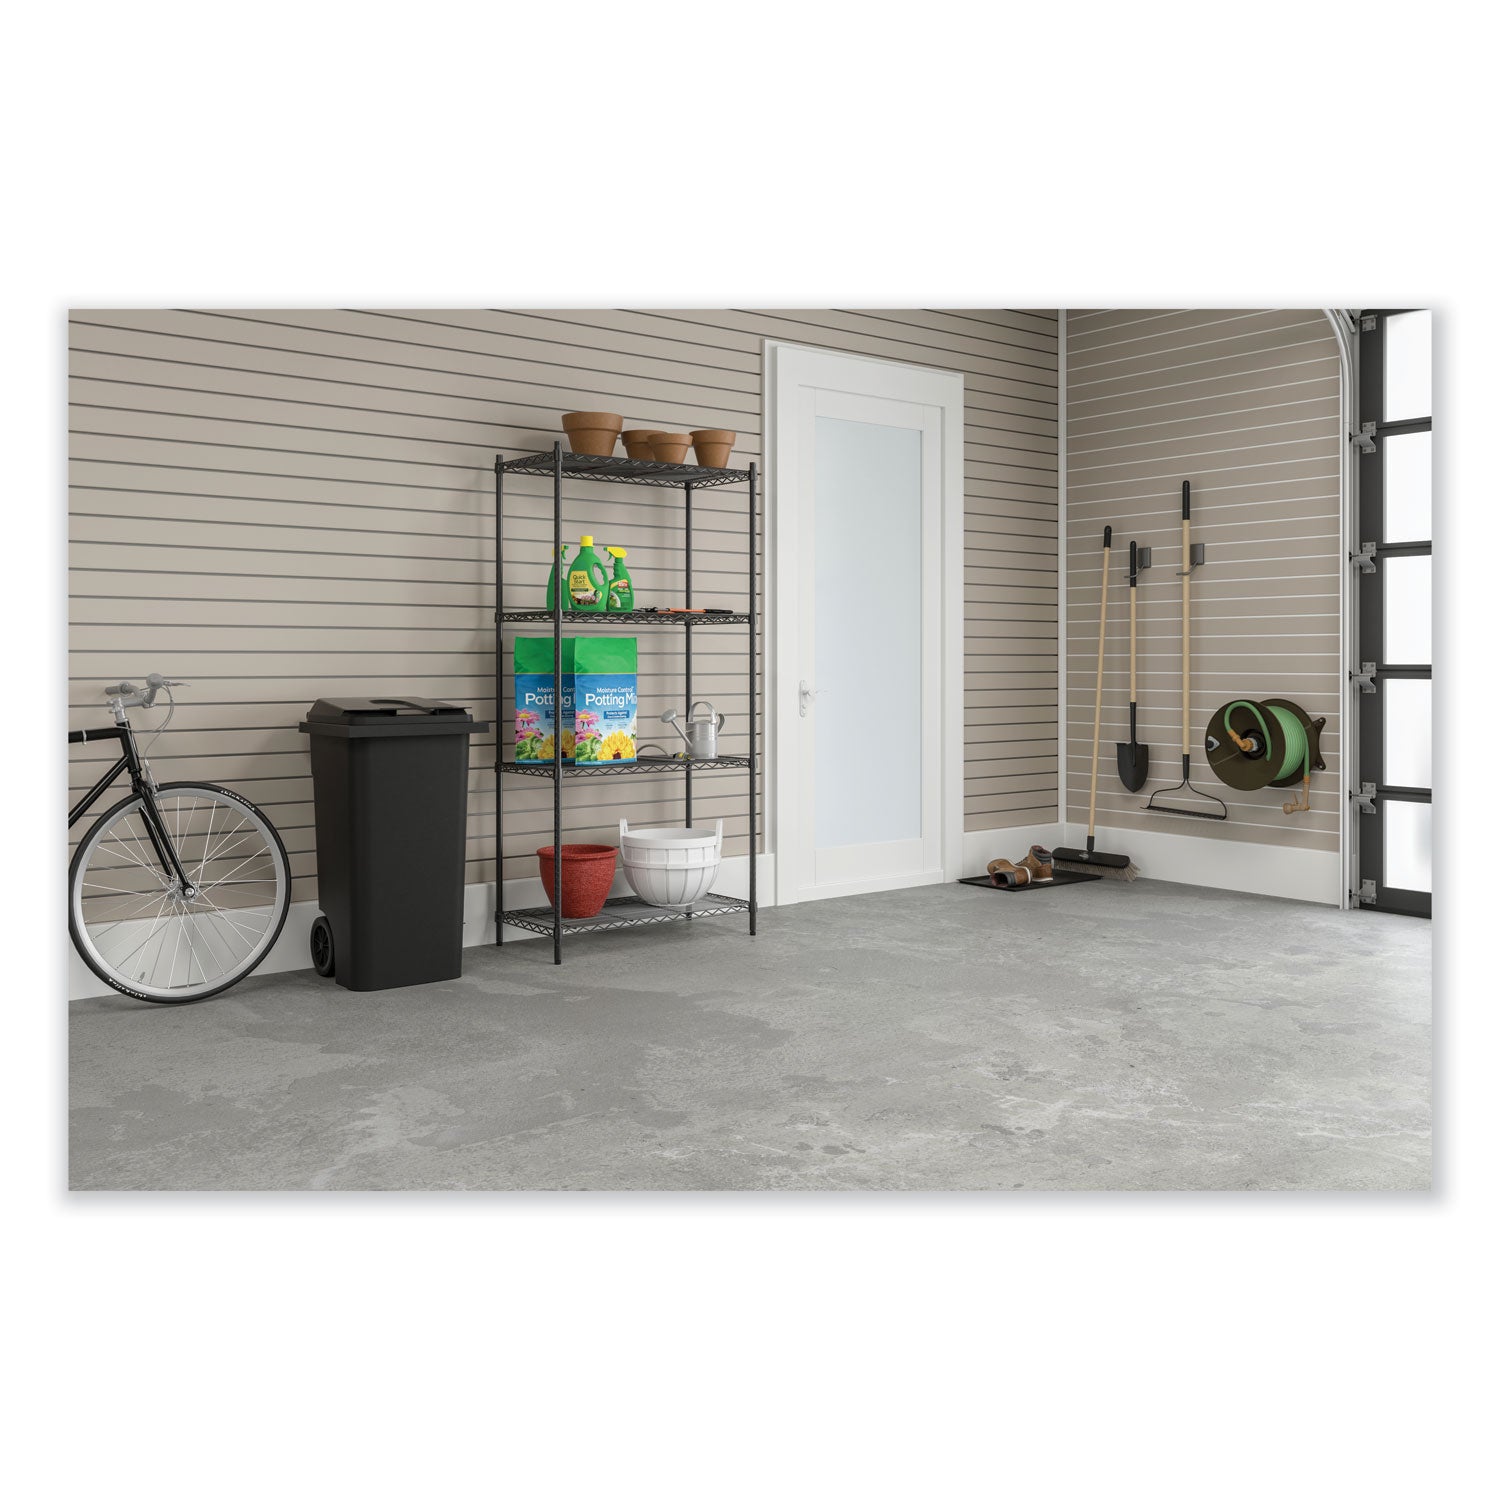 Industrial Wire Shelving, Four-Shelf, 36w x 24d x 72h, Black, Ships in 1-3 Business Days - 